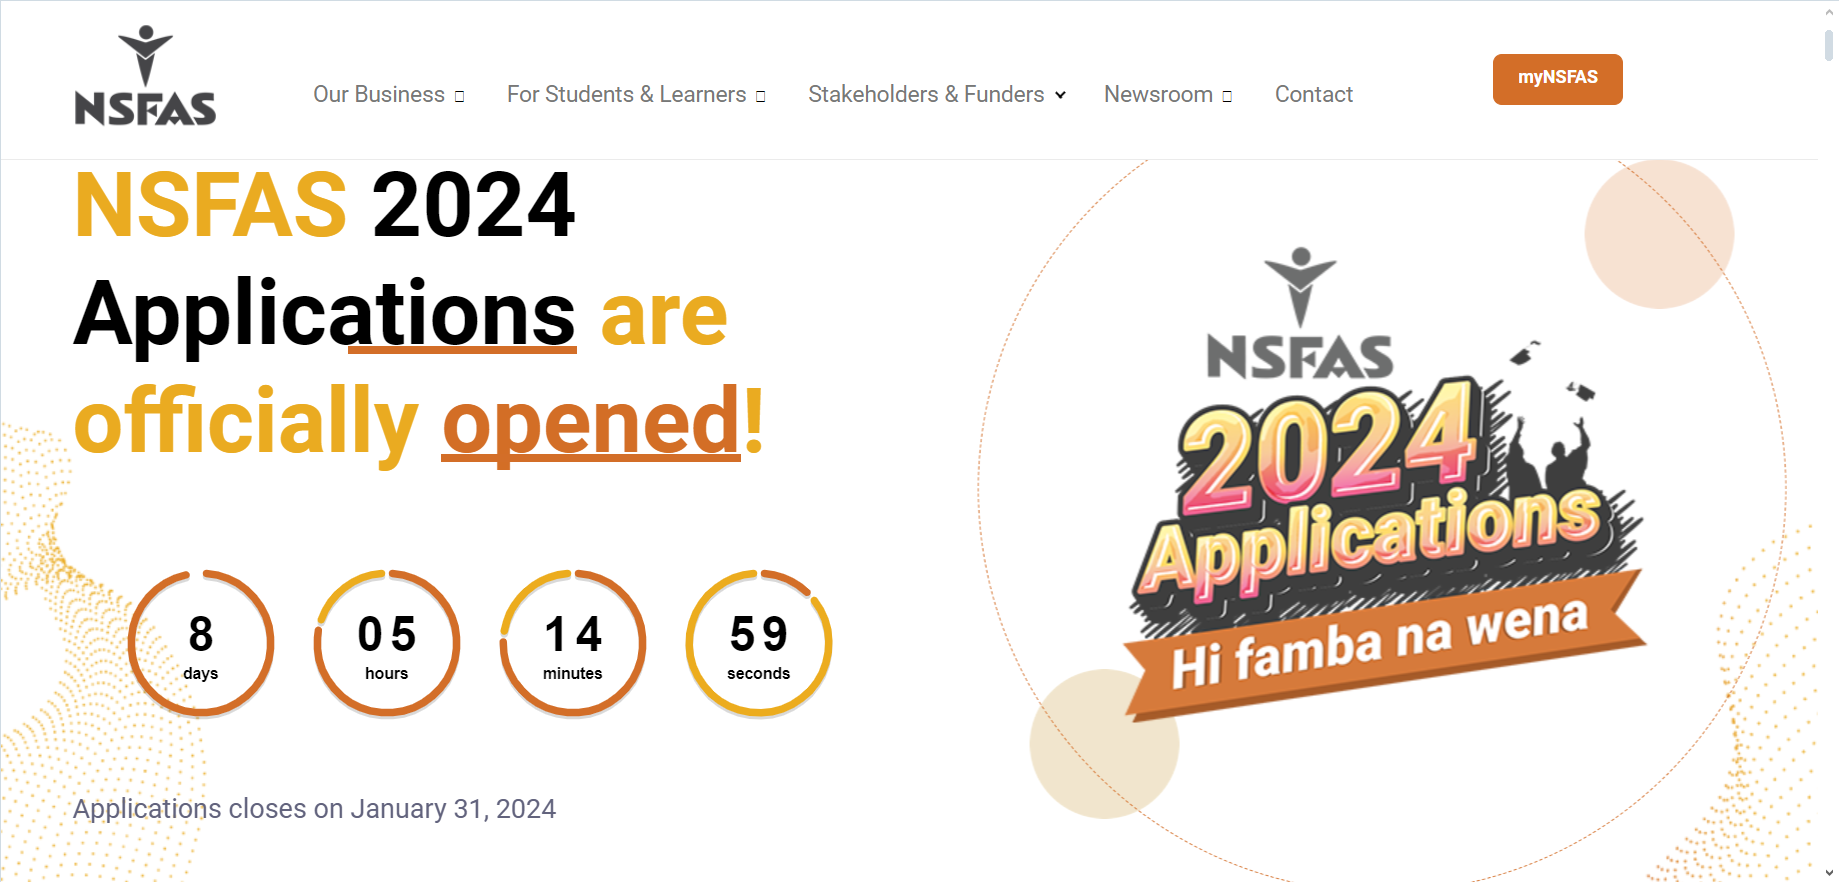 6 Steps To Complete Your 2024 NSFAS Application